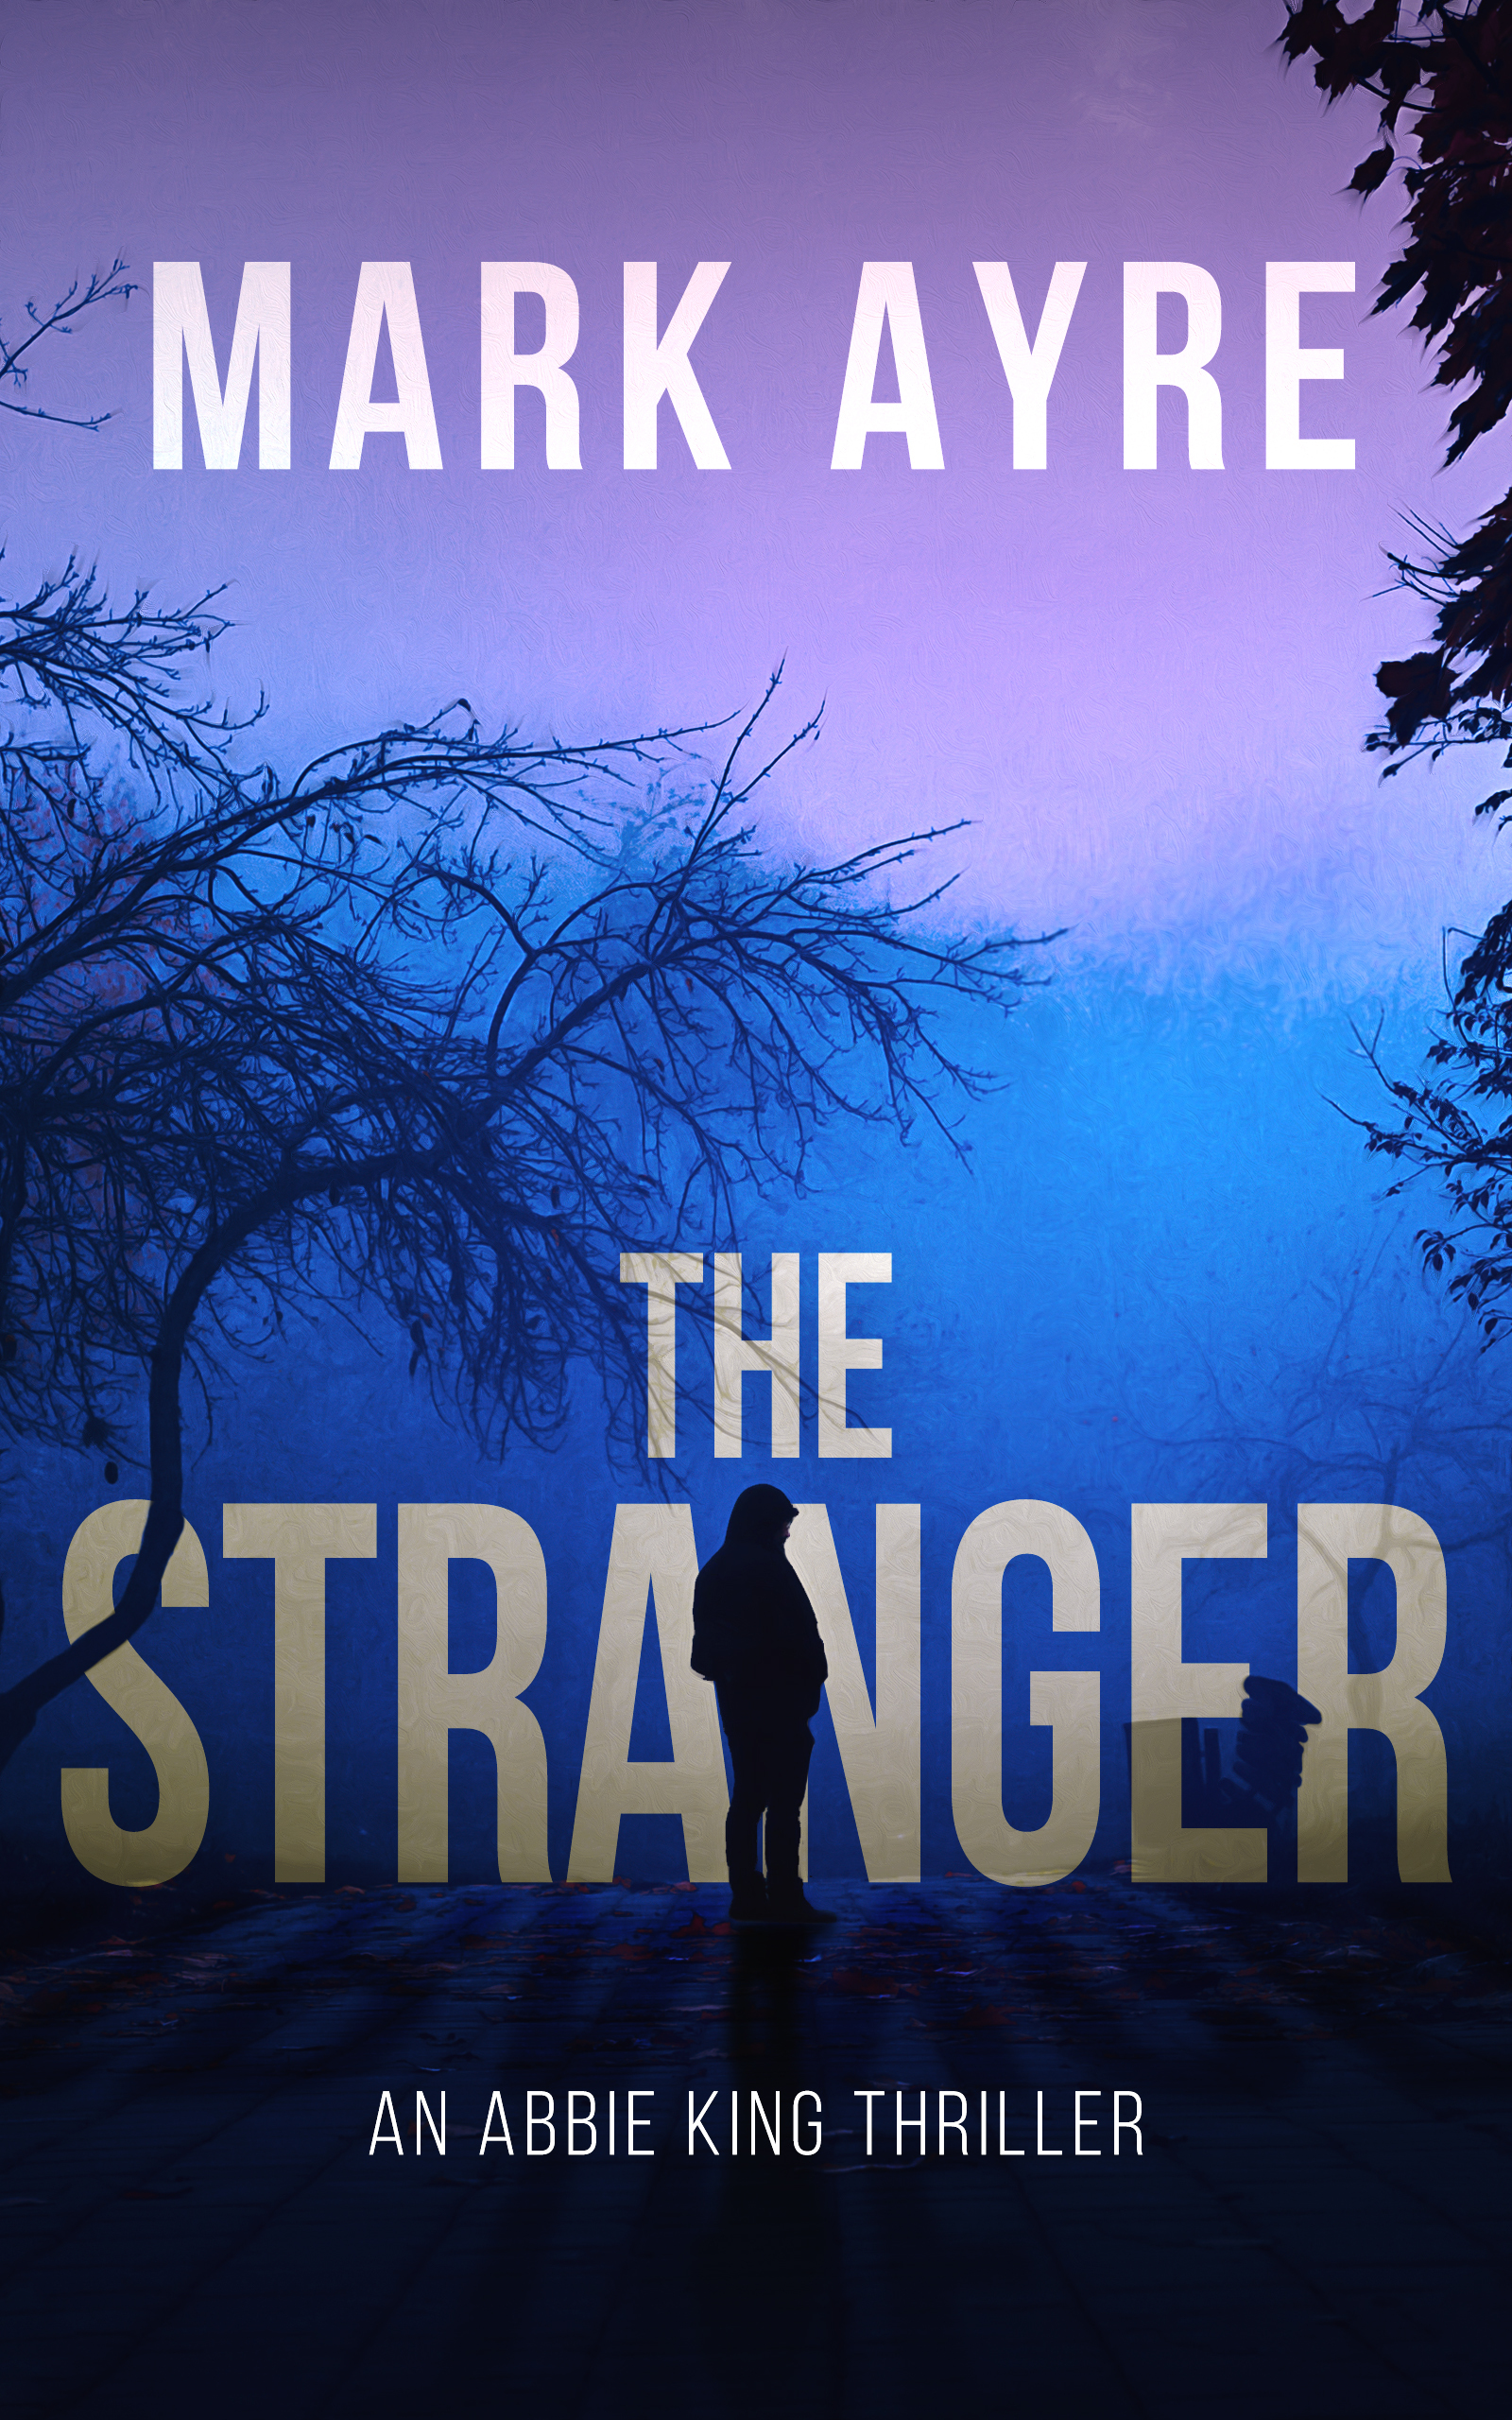 The Stranger (Abbie King Thrillers Book 1)